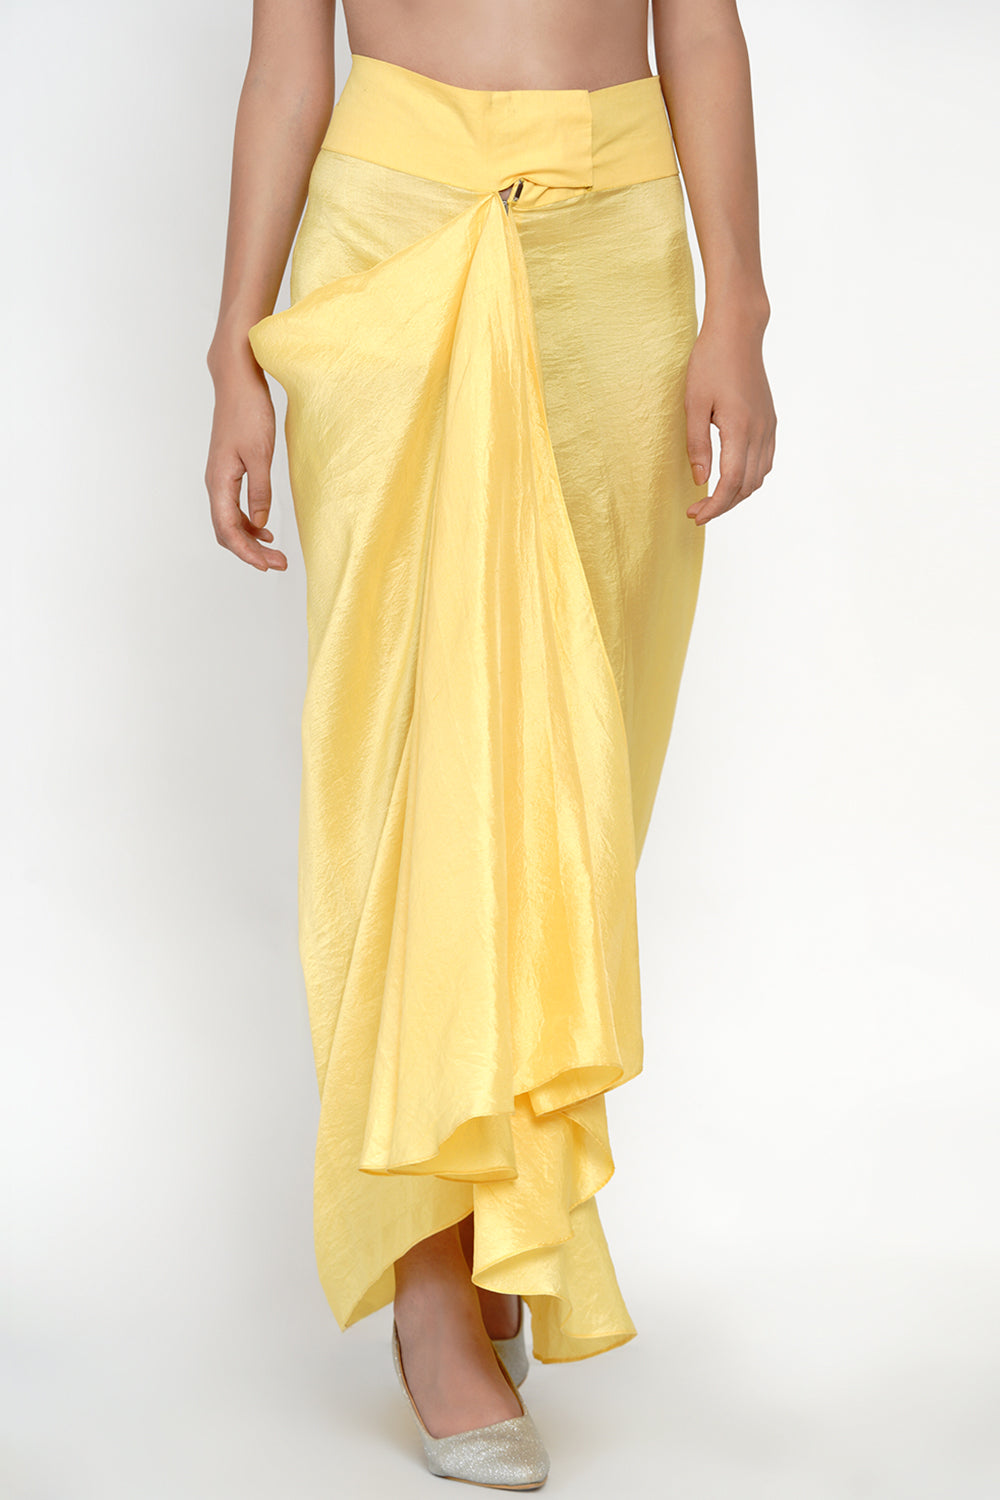 GANISONG Satin Layered Skirt in Natural  Lyst